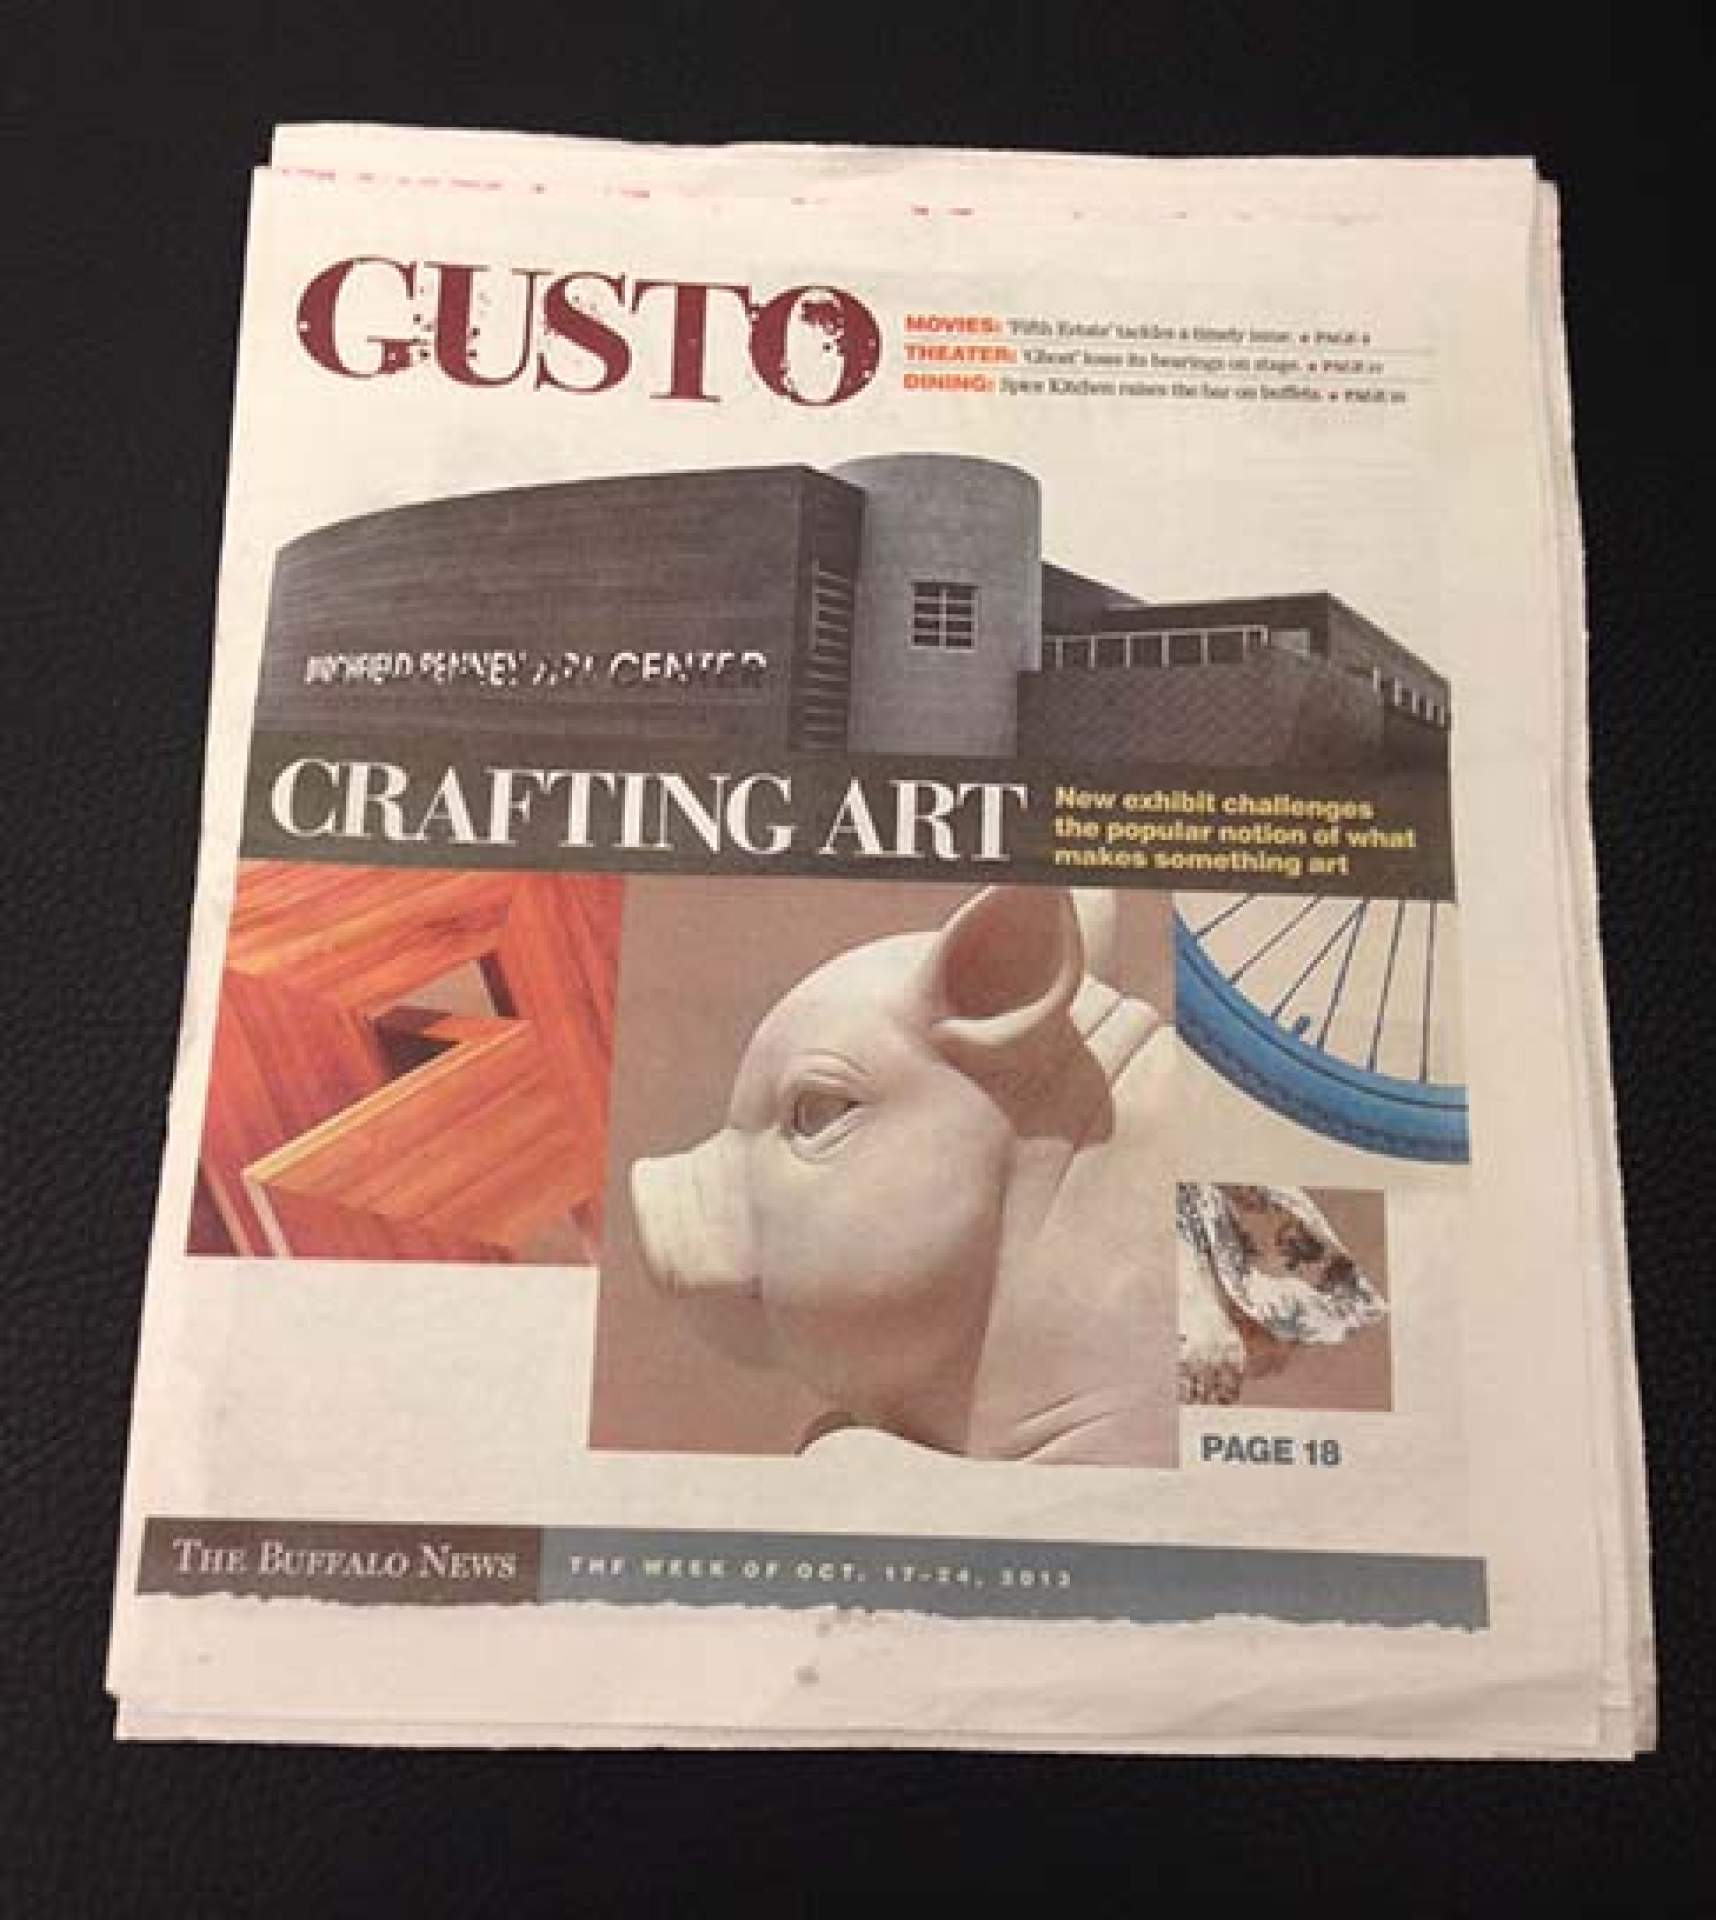 Art in Craft Media on the cover of Gusto